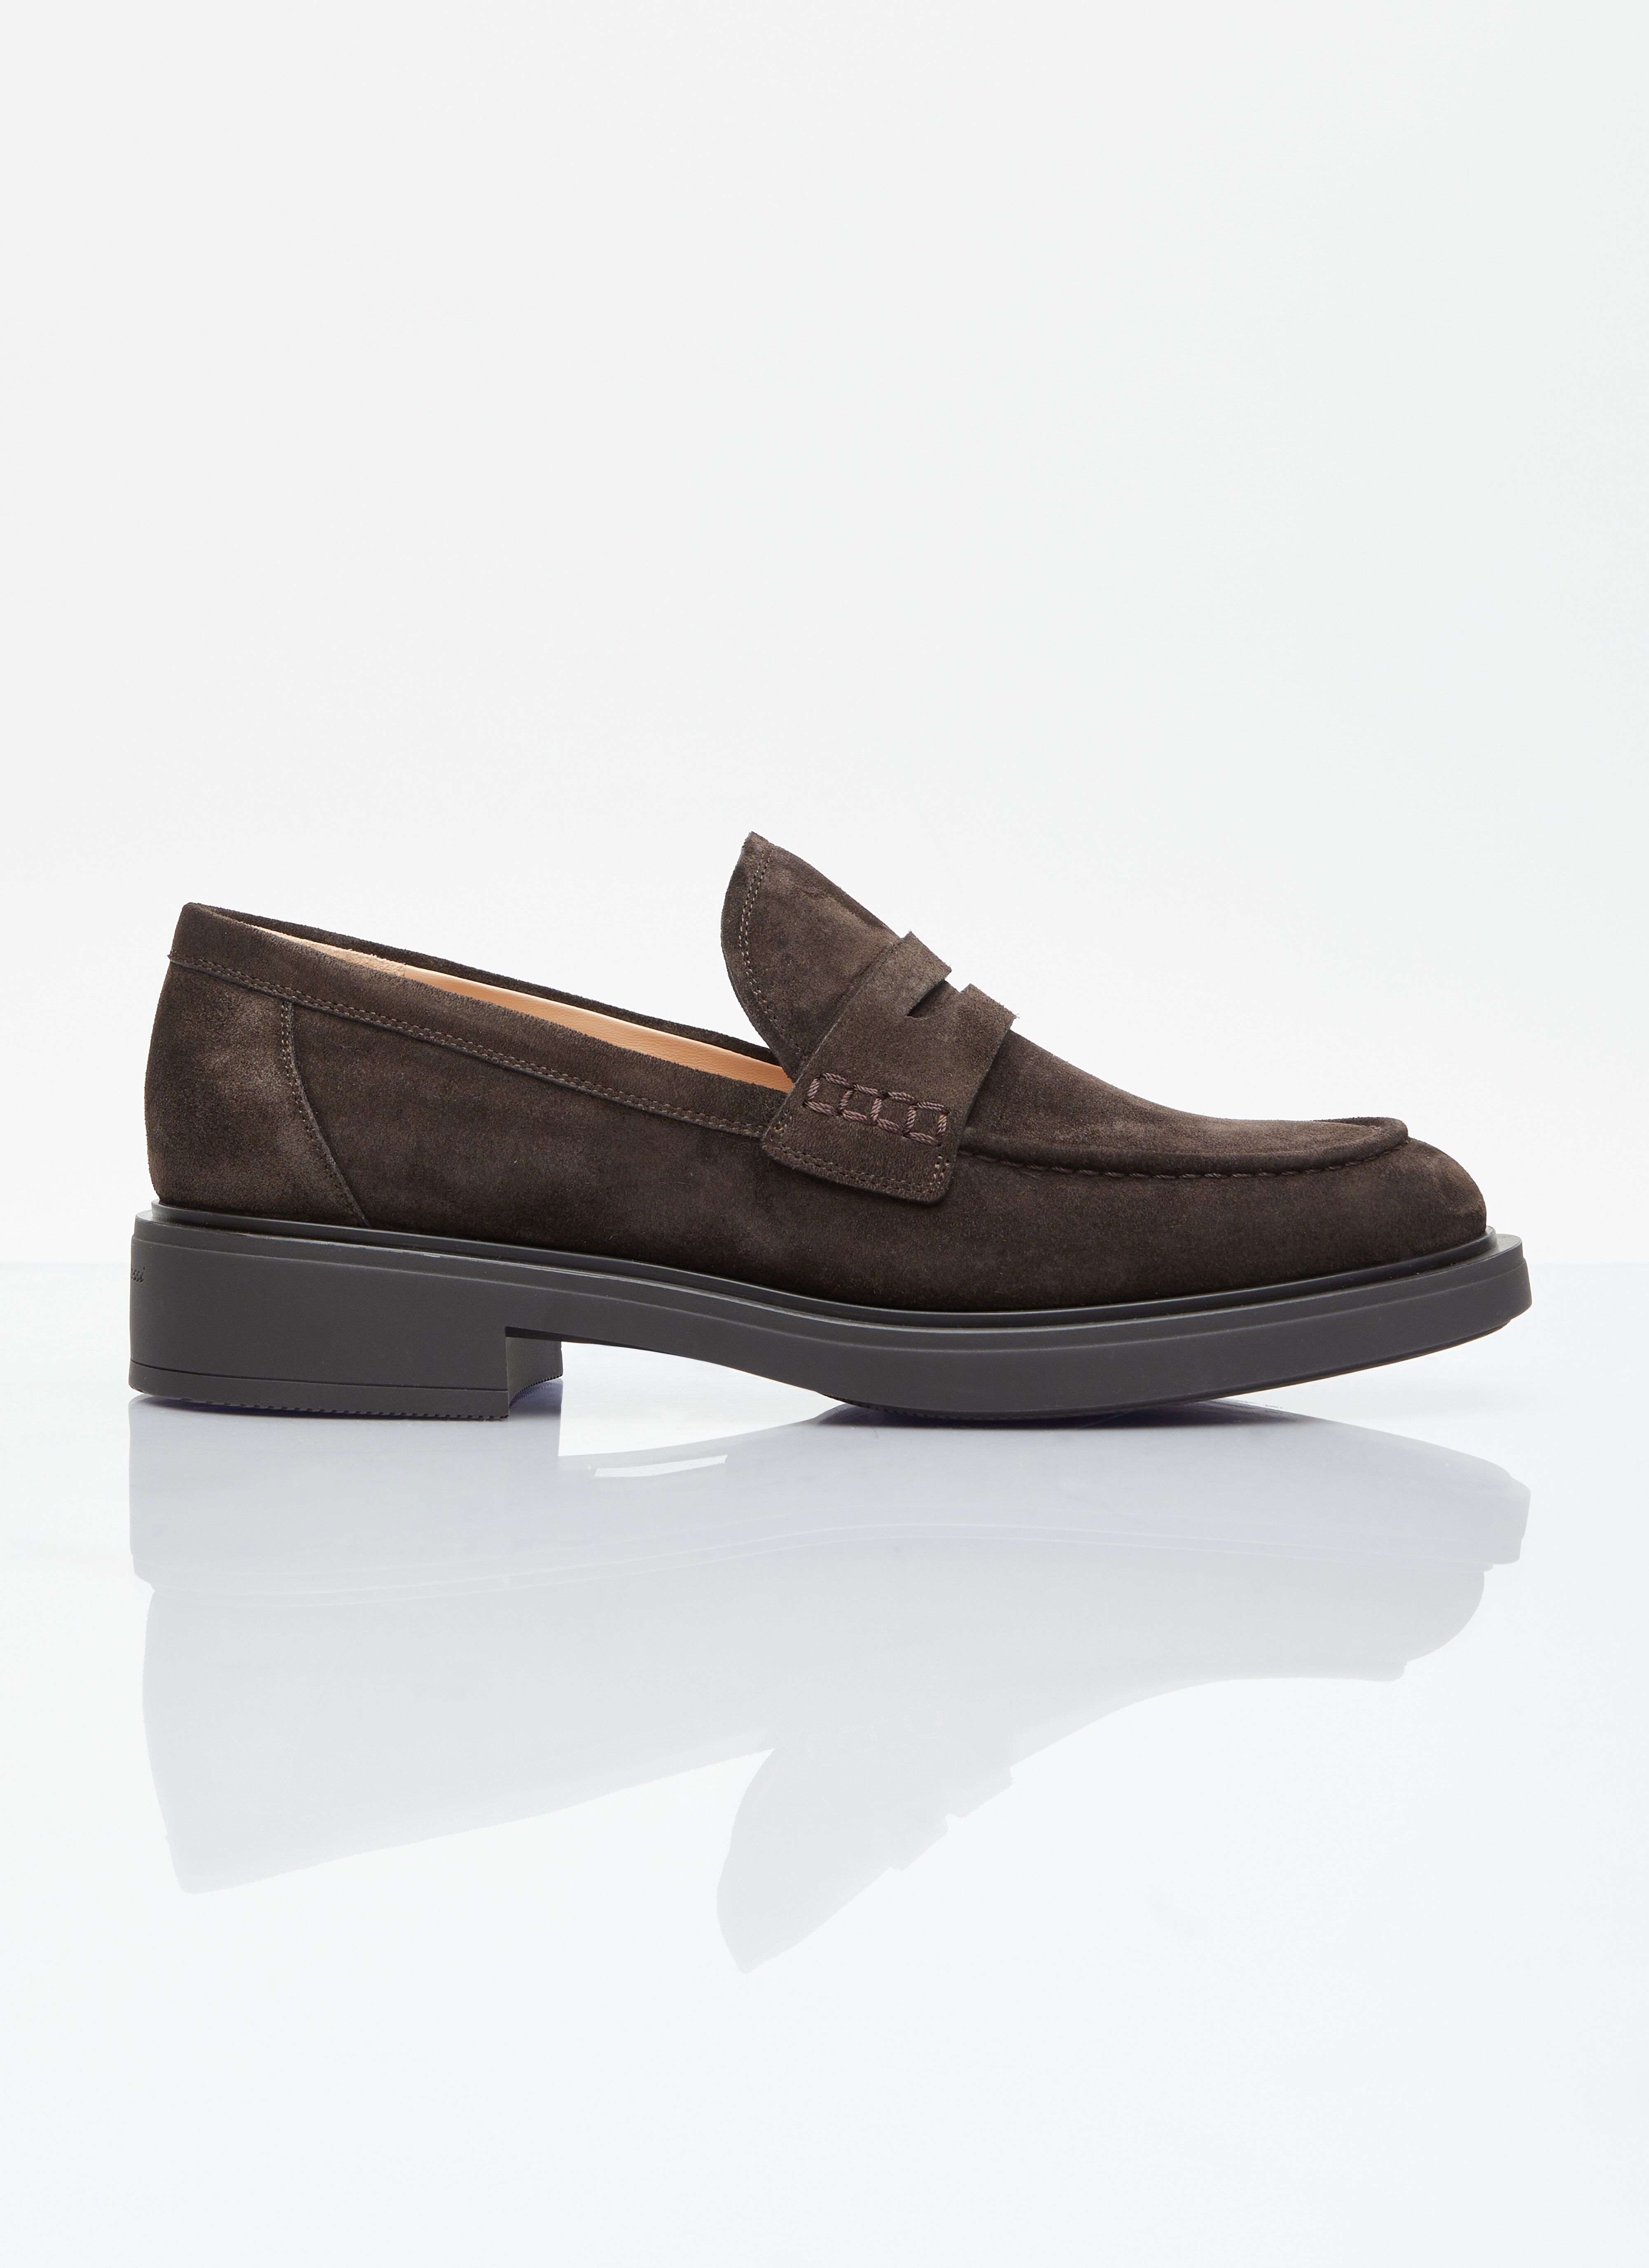 Gianvito Rossi Harris Suede Loafers Brown gia0255014